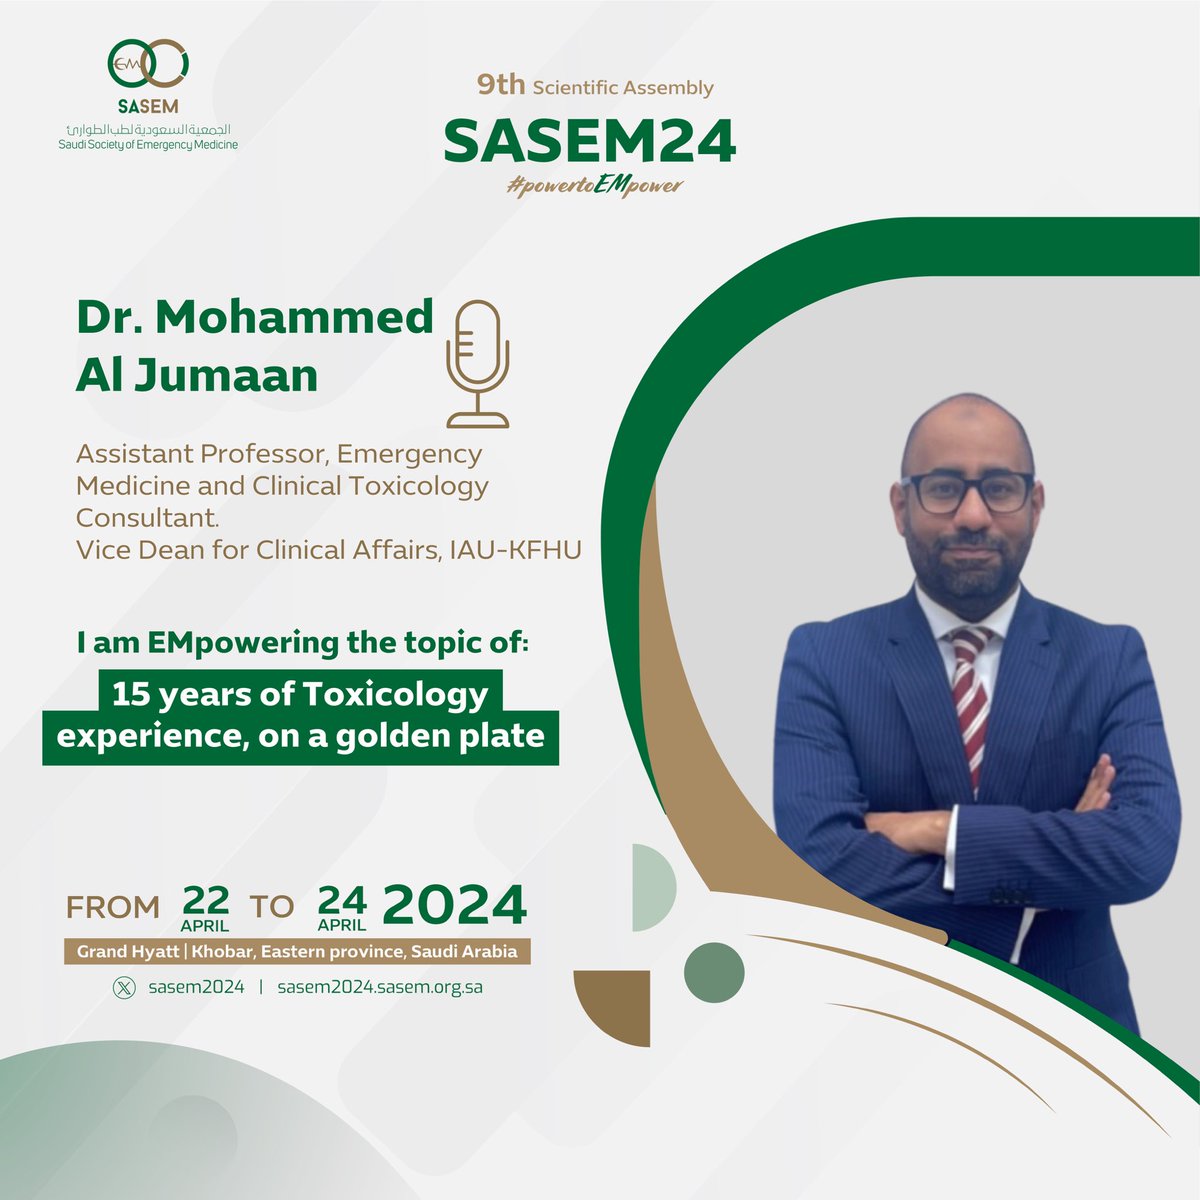 see you in #SASEM2024  to #PowertoEMpower